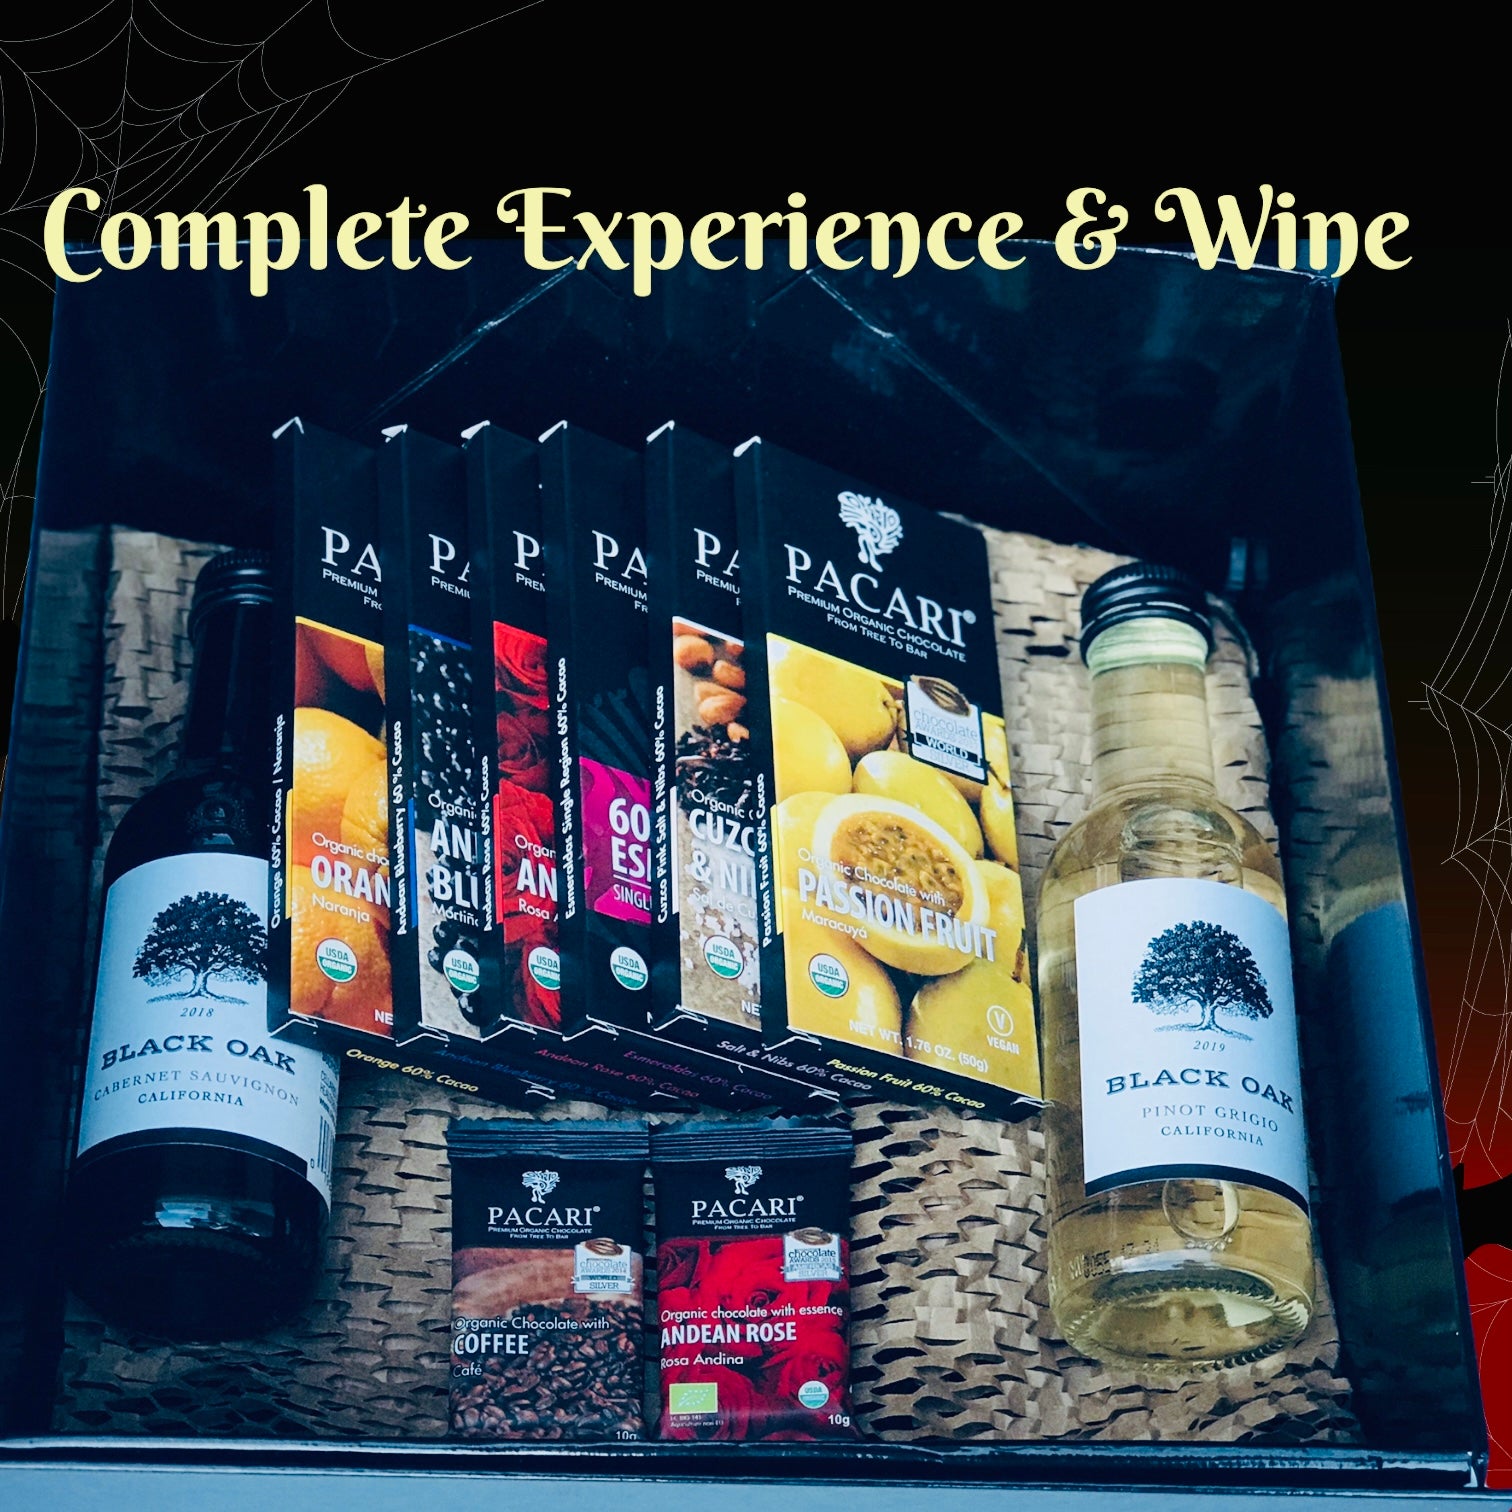 Complete Experience + Wine